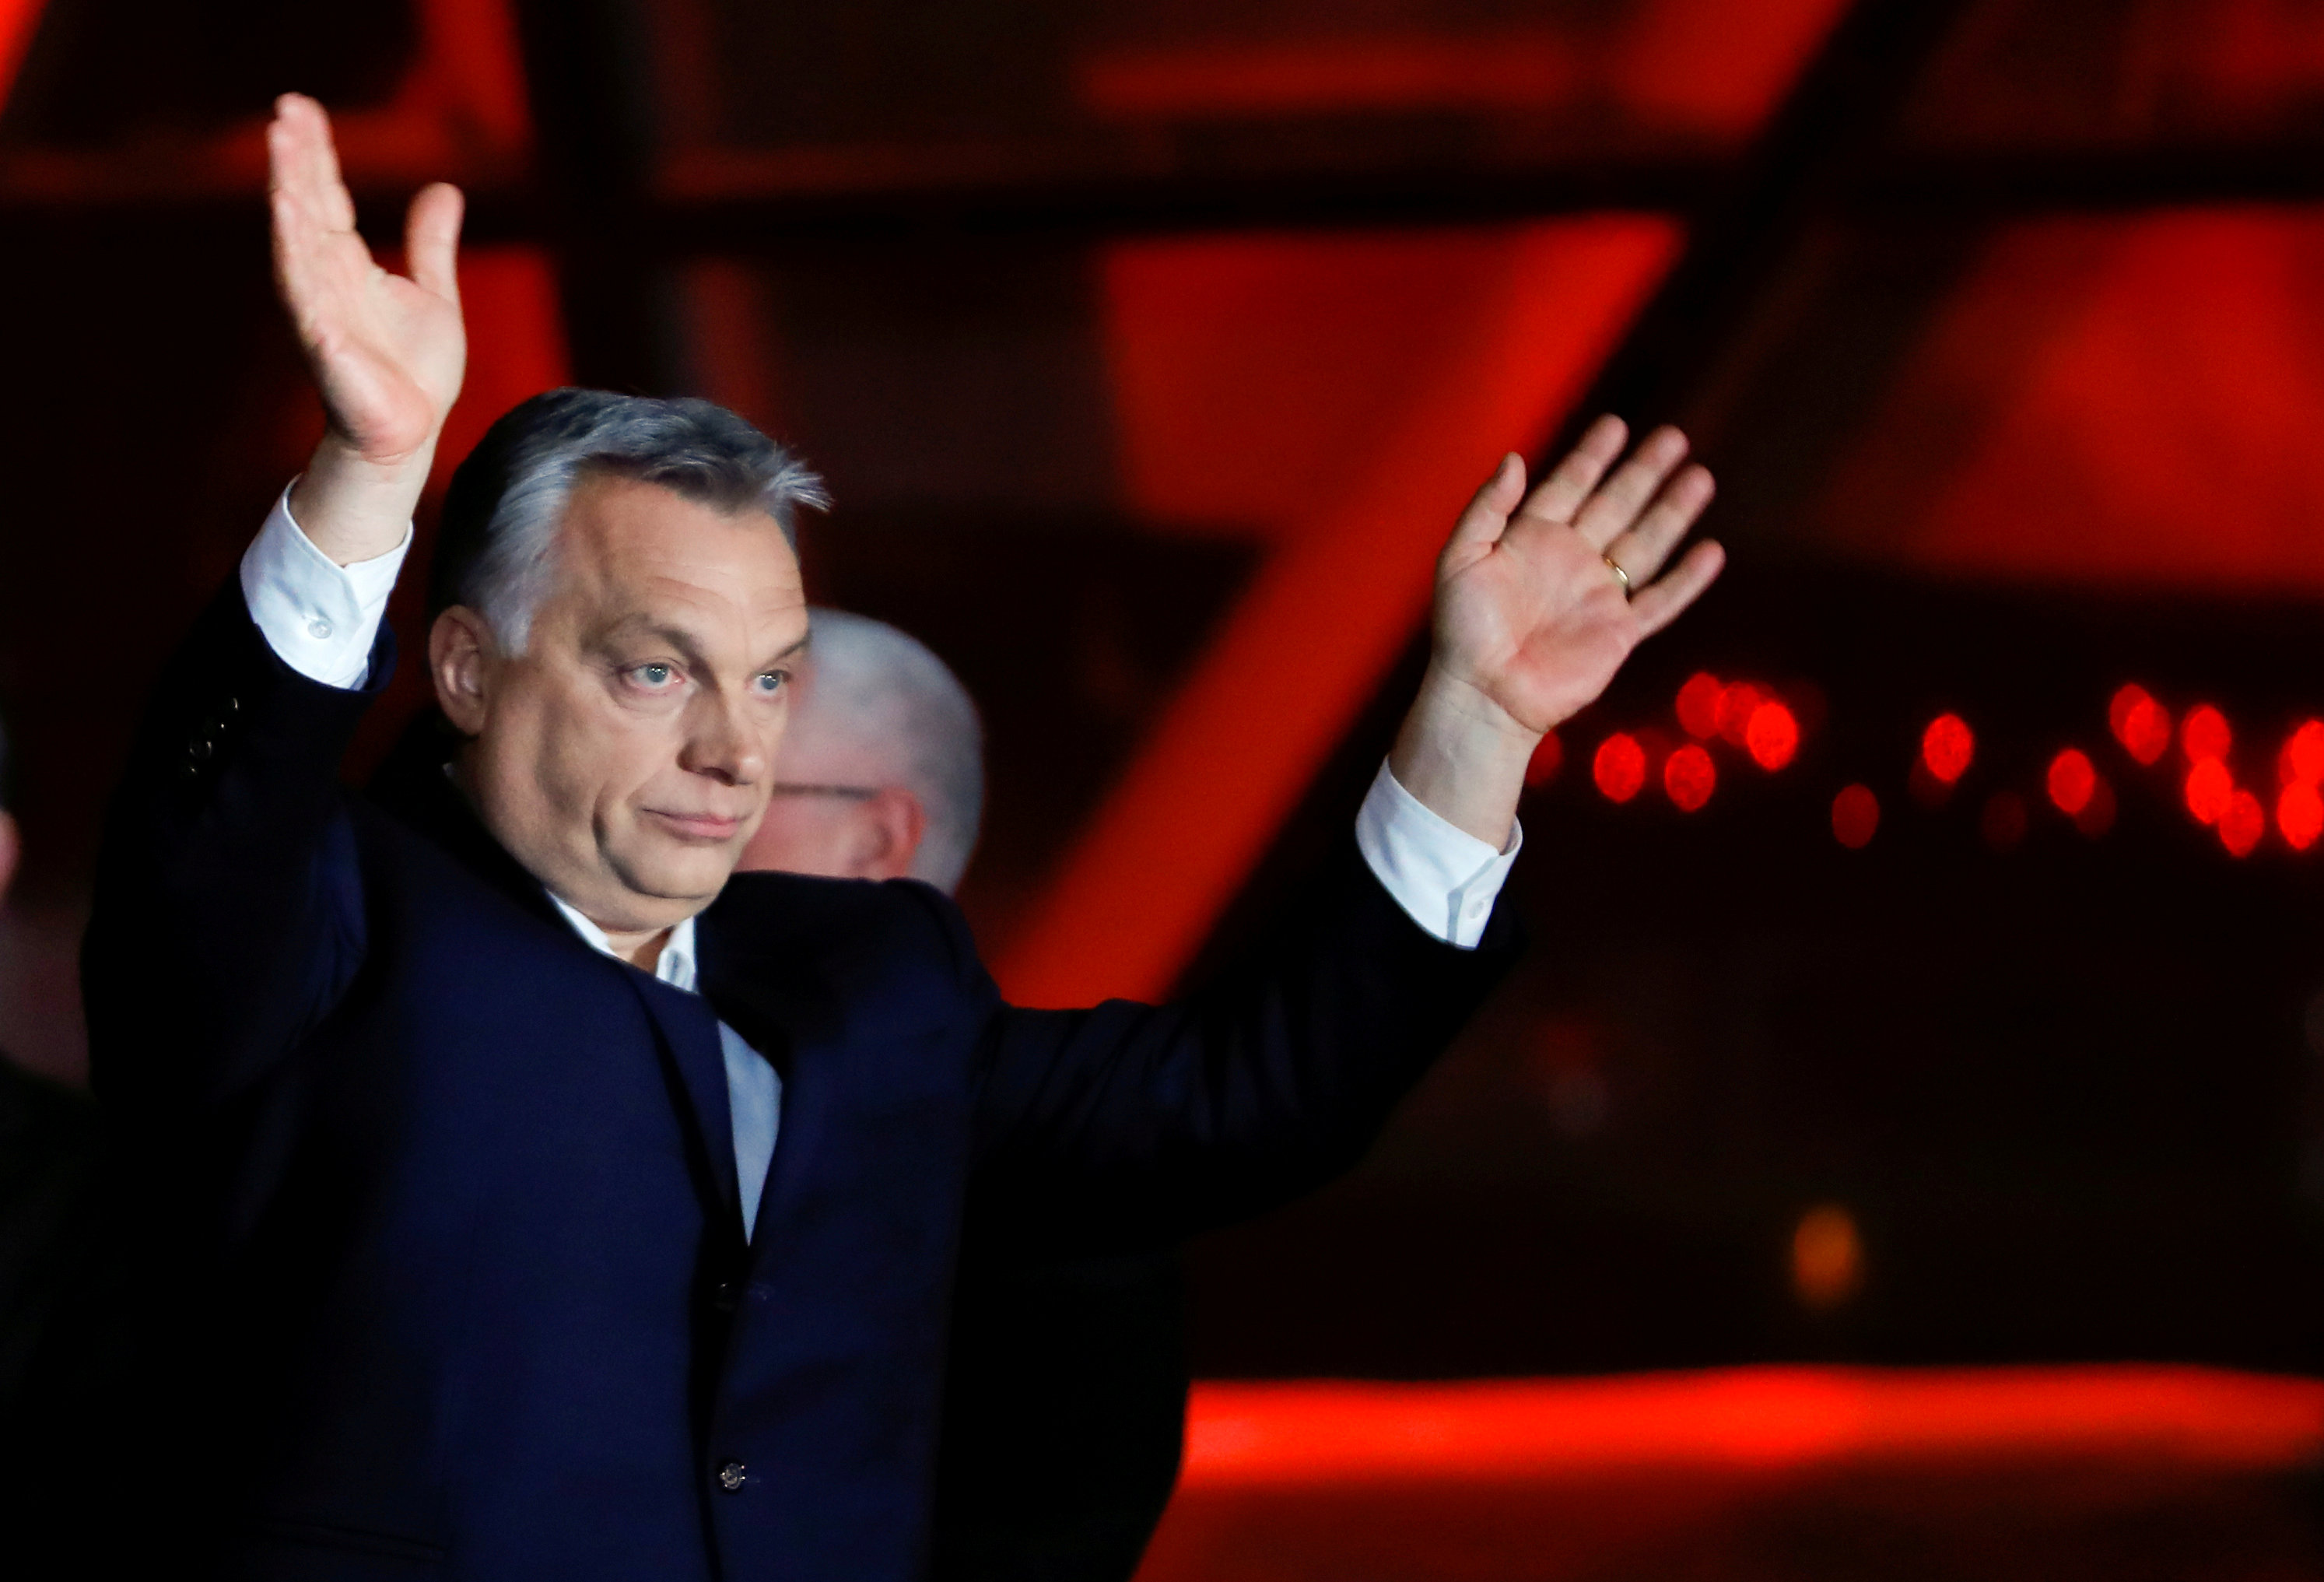 Hungarian Prime Minister Viktor Orban addresses the supporters after the announcement of the partial results of parliamentary election in Budapest, Hungary, April 8, 2018.